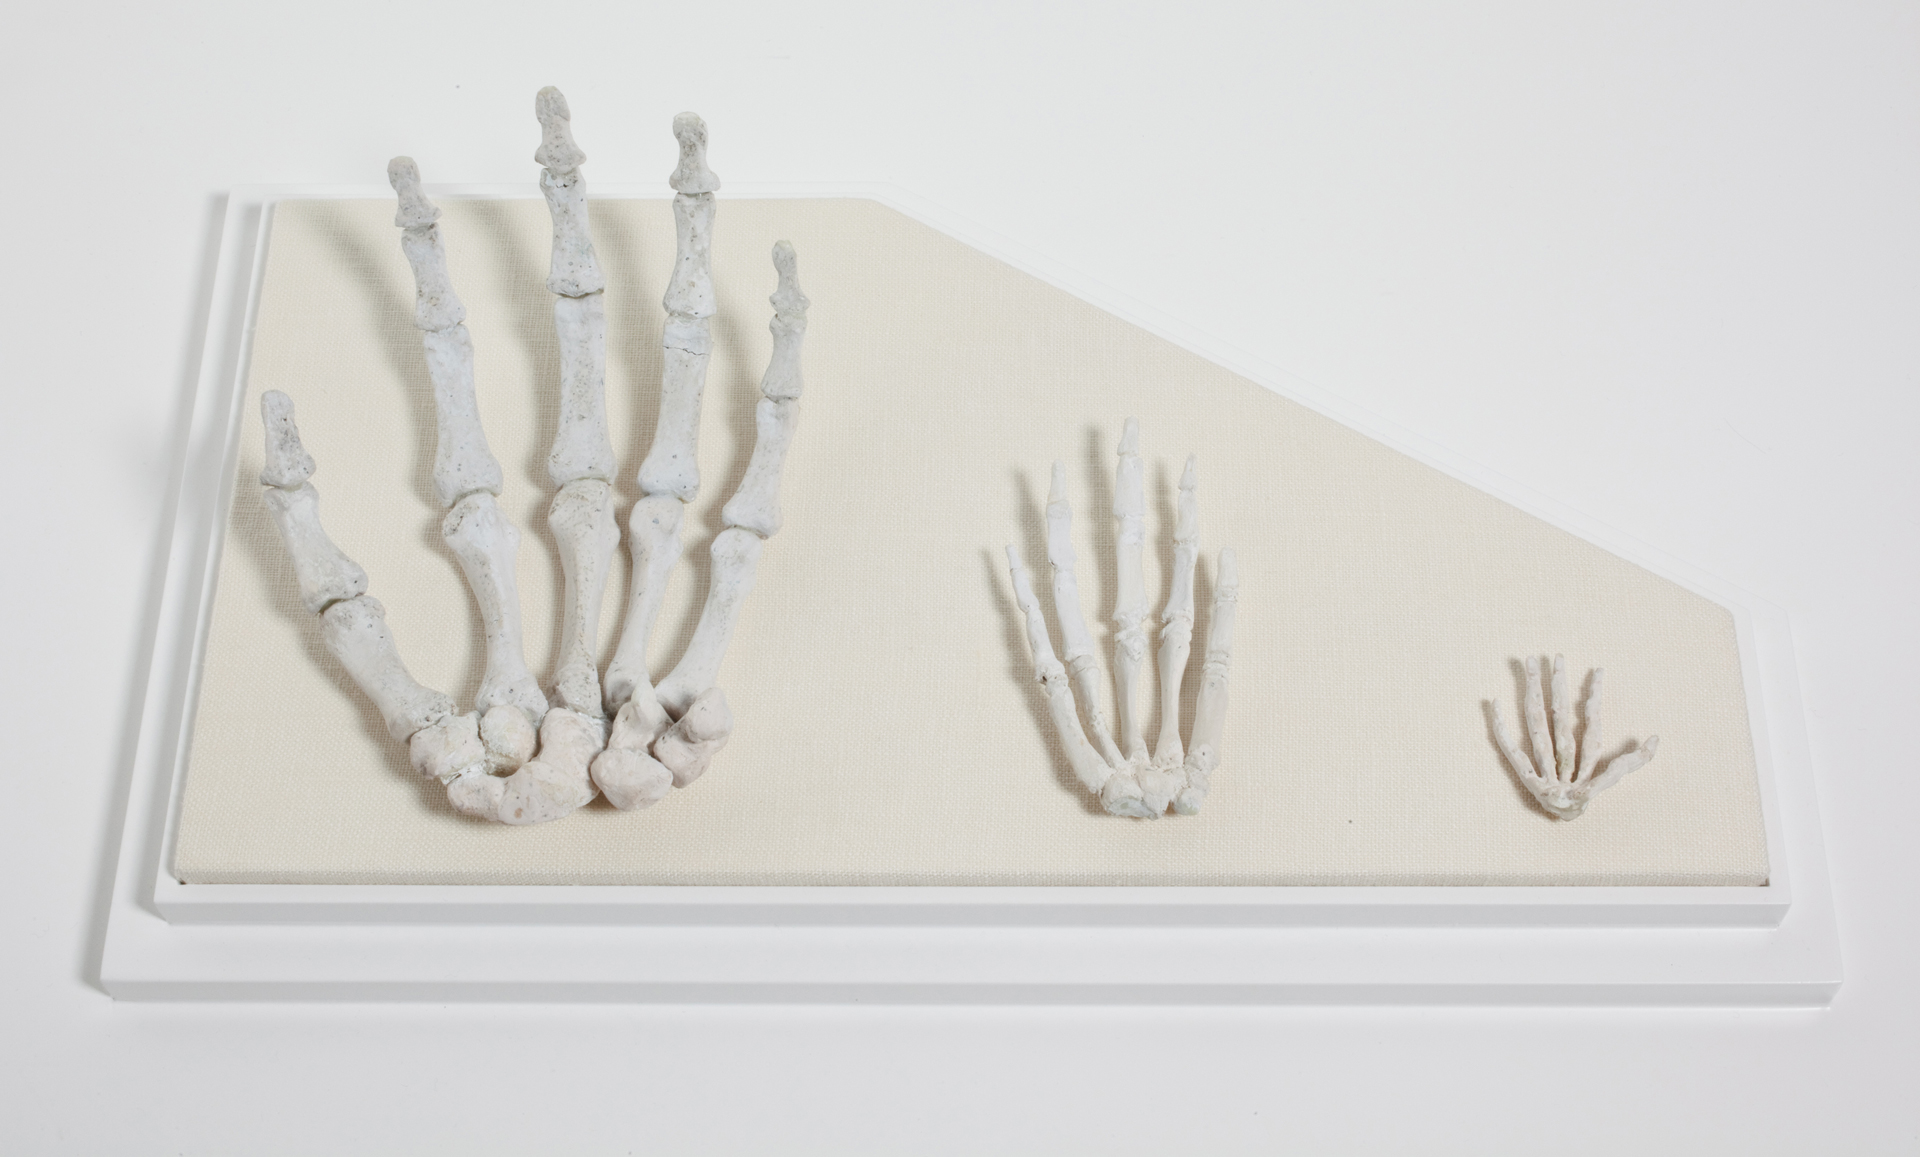 Three white skeletons of hands in decreasing size on a cream trapezoid mount